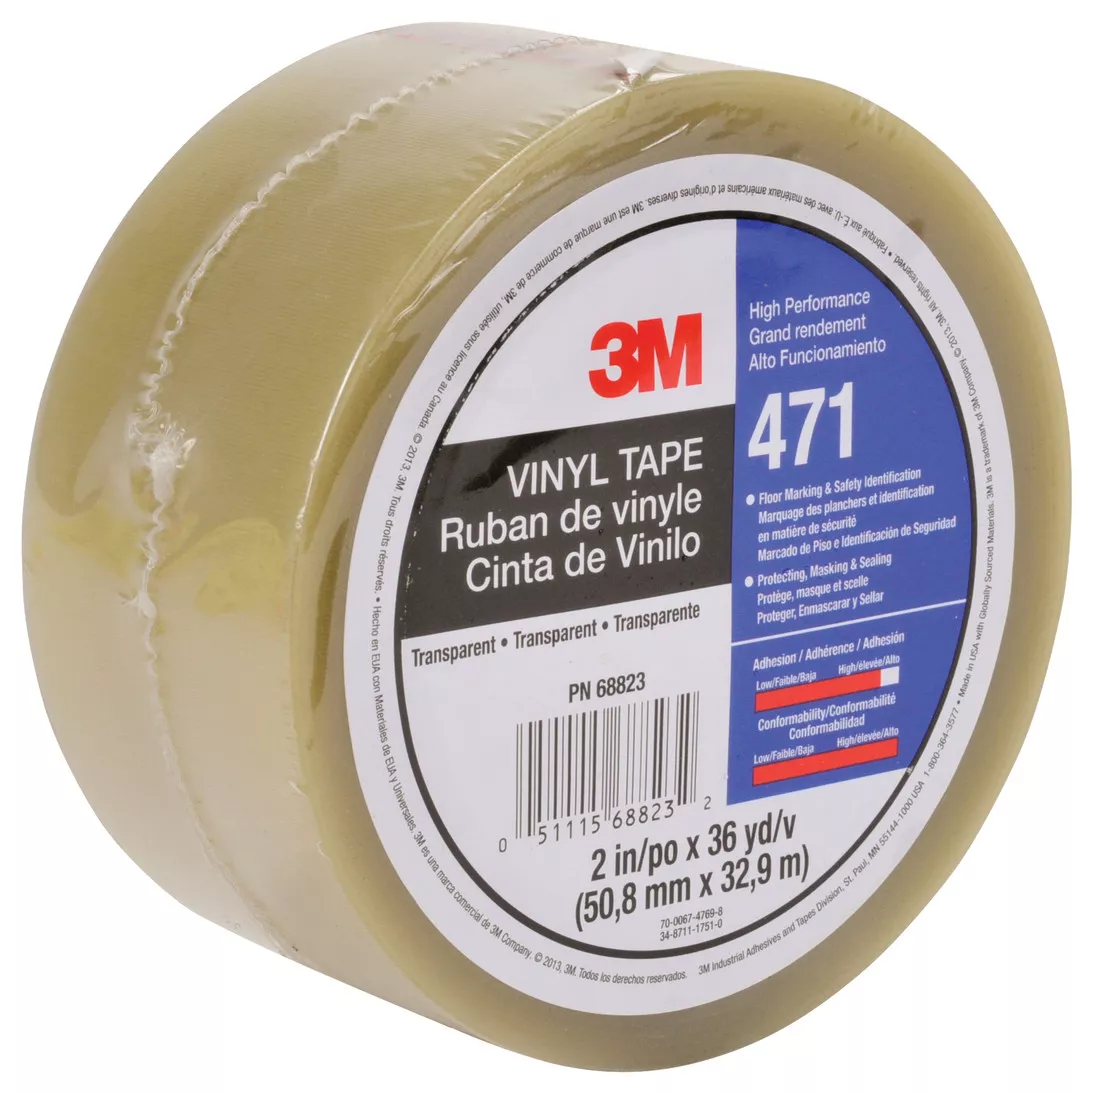 3M™ Vinyl Tape 471, Transparent, 2 in x 36 yd, 5.2 mil, 24 rolls per
case, Individually Wrapped Conveniently Packaged